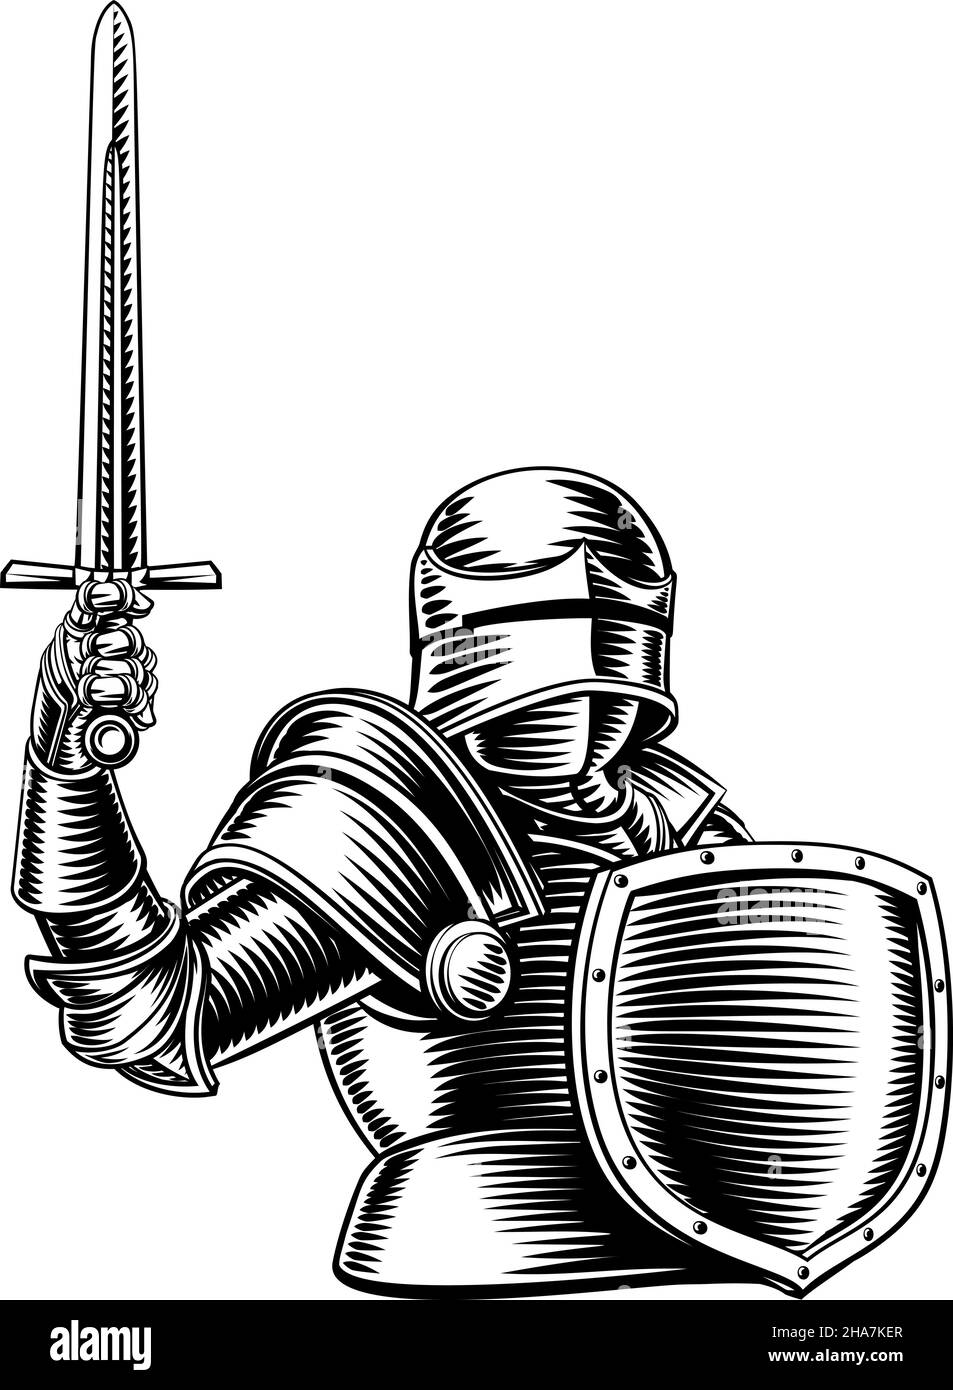 Medieval Knight Sword And Shield Vintage Woodcut Stock Vector